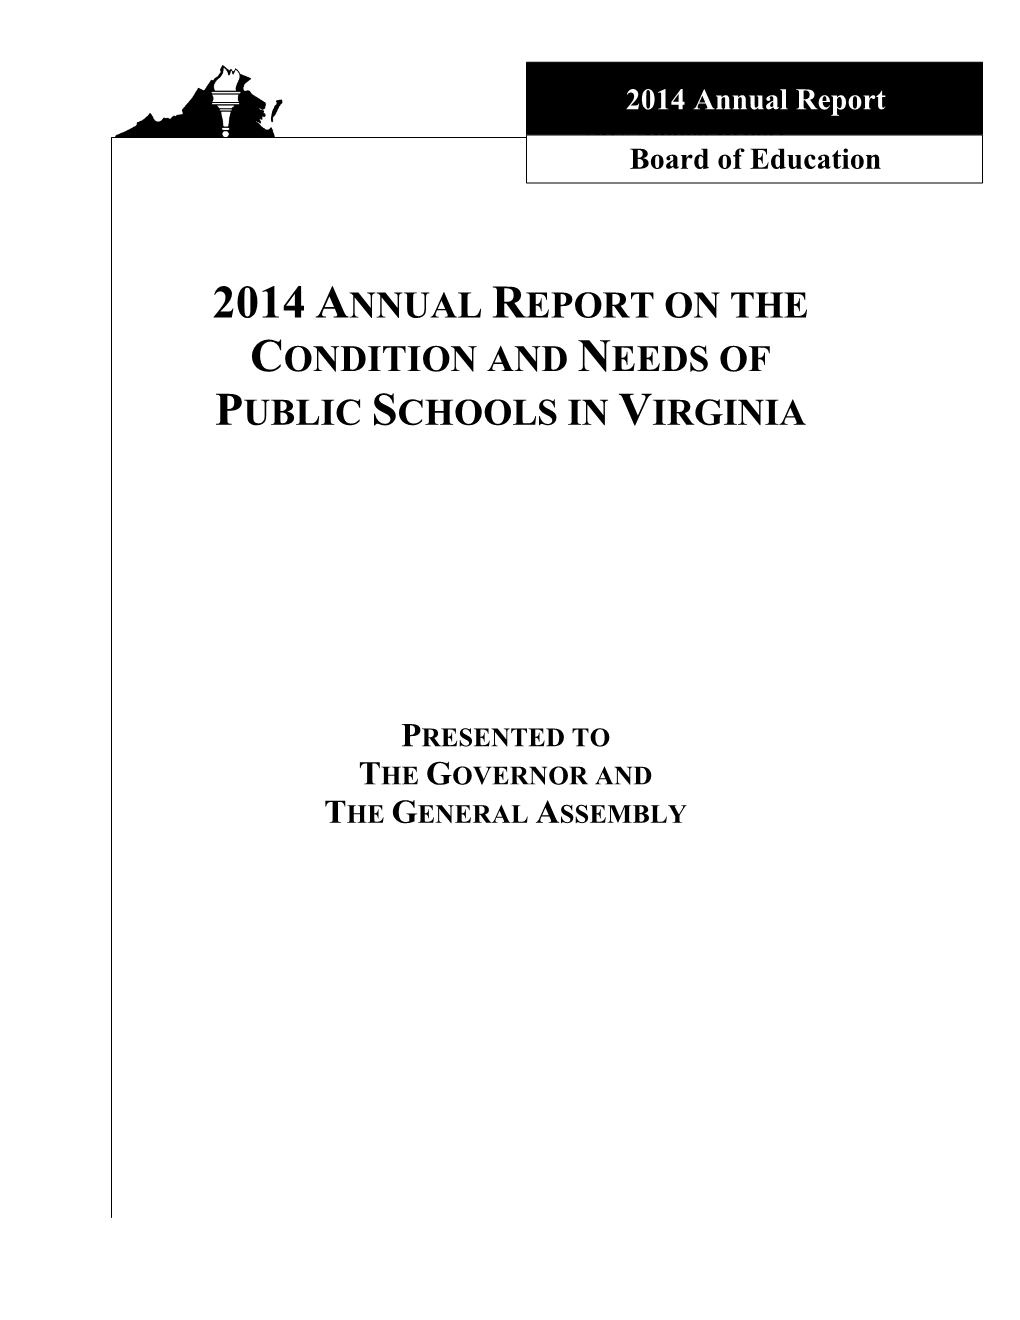 2014 Annual Report on the Condition and Needs of Public Schools in Virginia